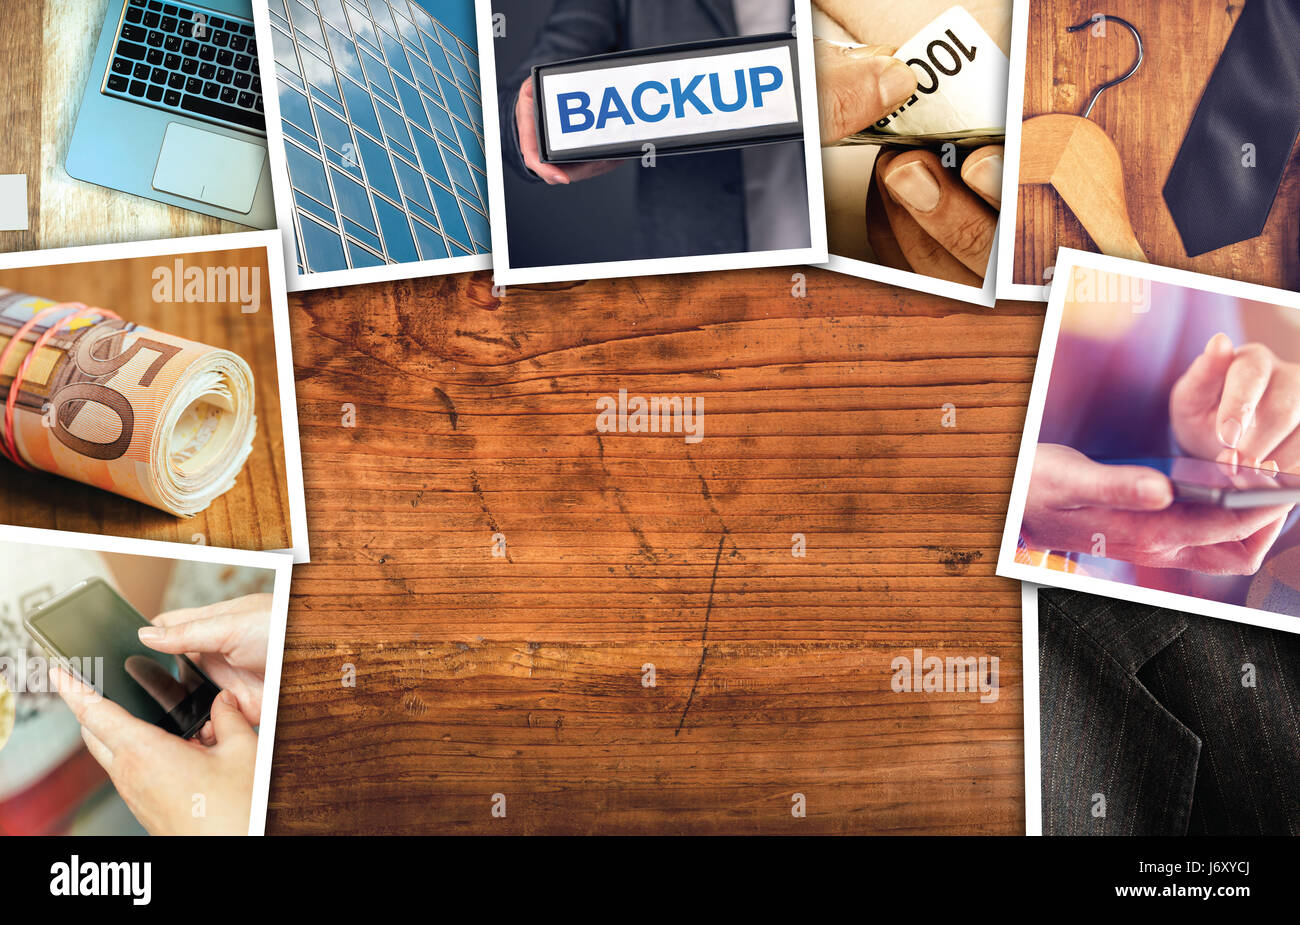 Business and entrepreneurship photo collage over wooden office desk background Stock Photo